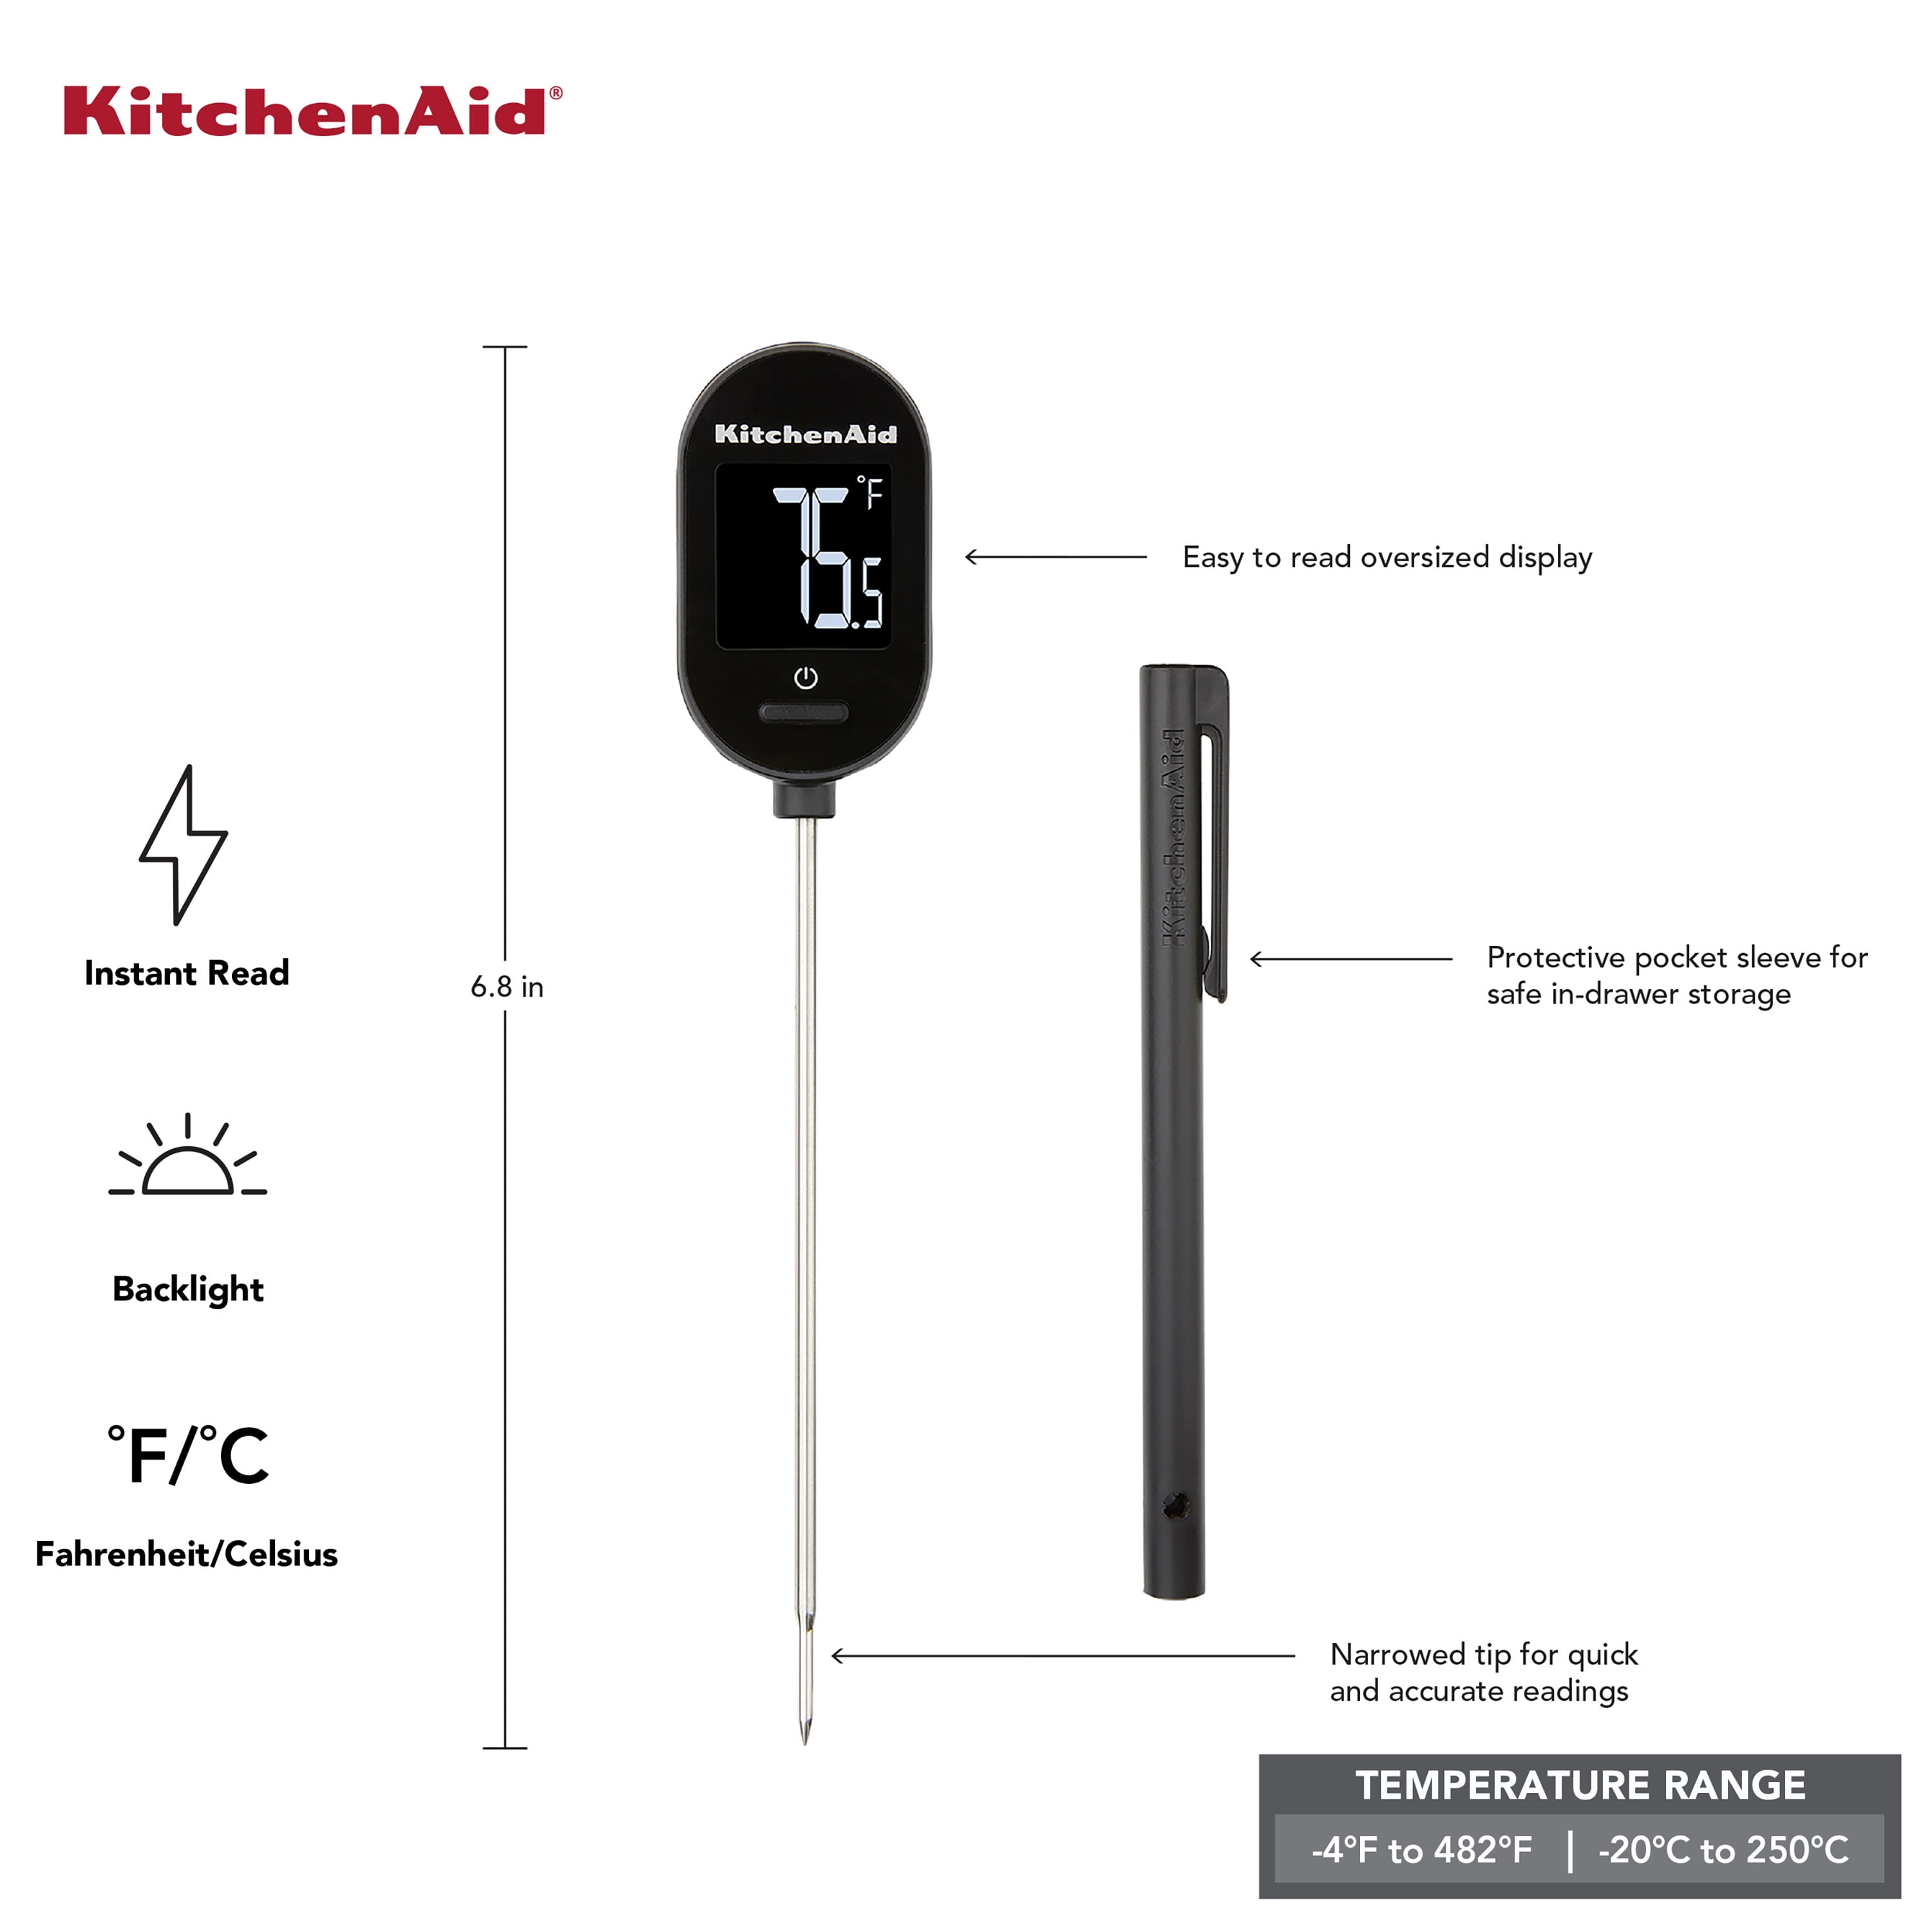  KitchenAid KQ902 Leave-in, Oven/Grill safe Meat